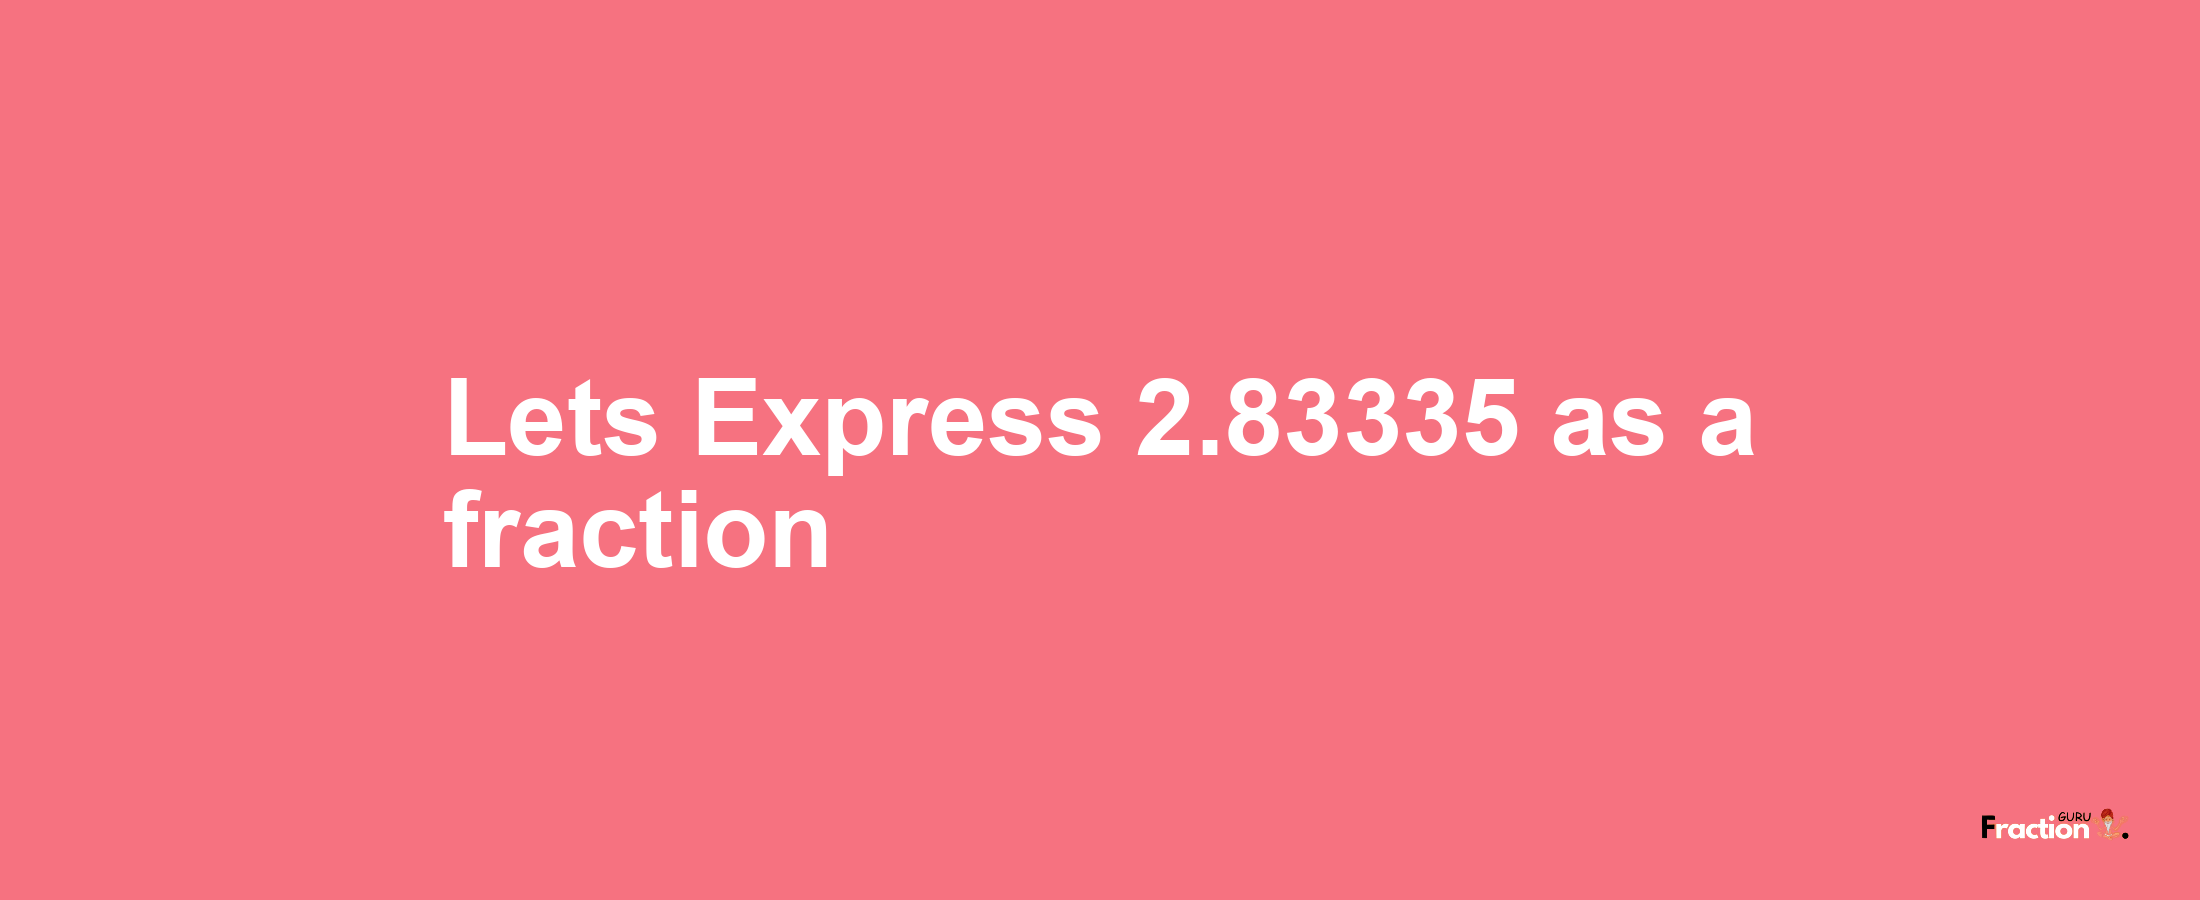 Lets Express 2.83335 as afraction